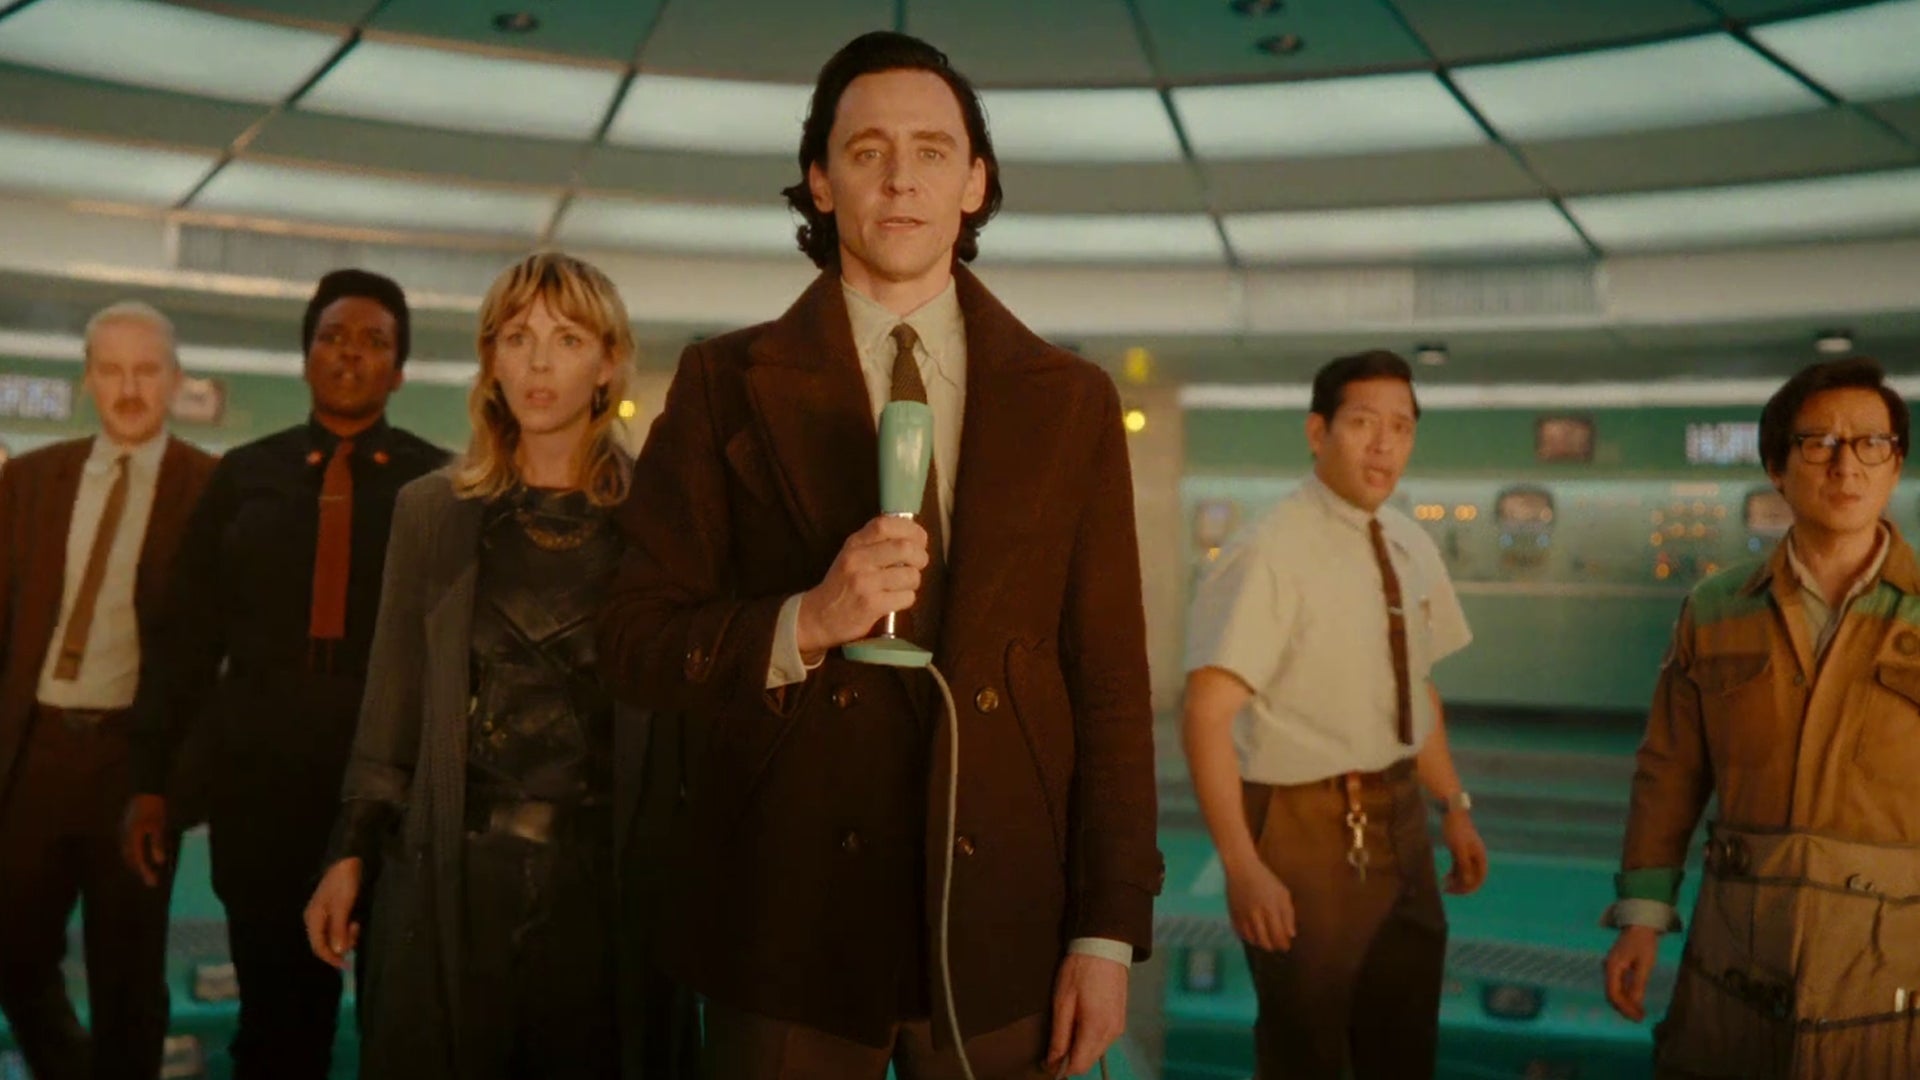 Loki Imagines the End of the World, But Not Capitalism